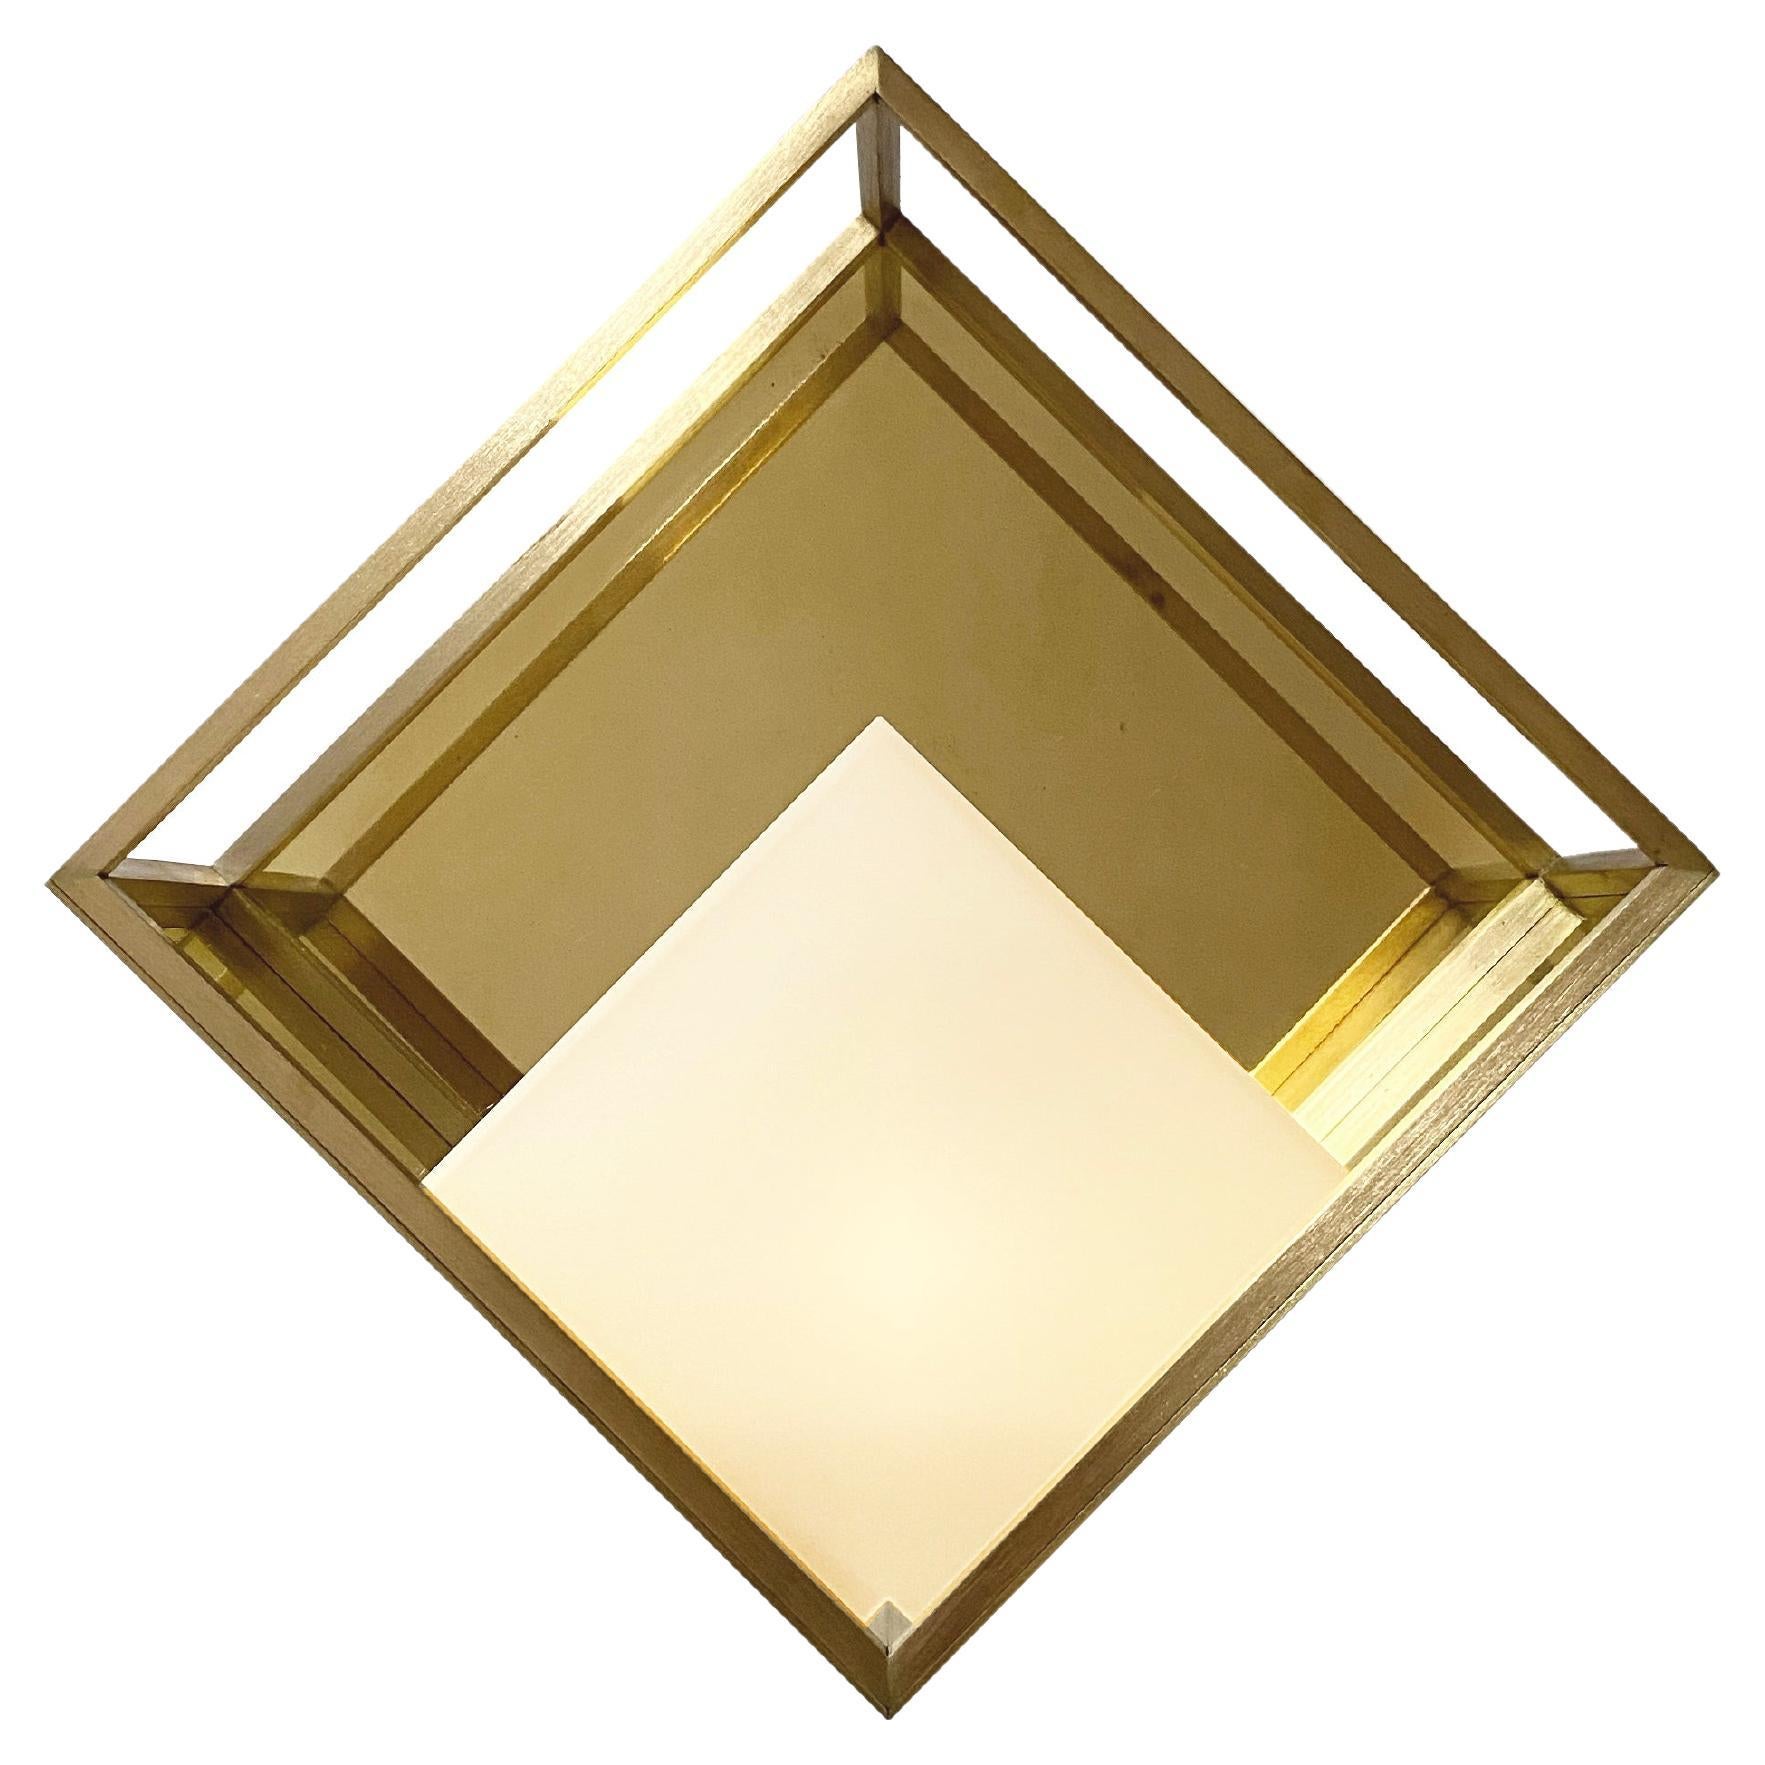 WISO - Solid brass wall sconce handmade by Diaphan Studio For Sale